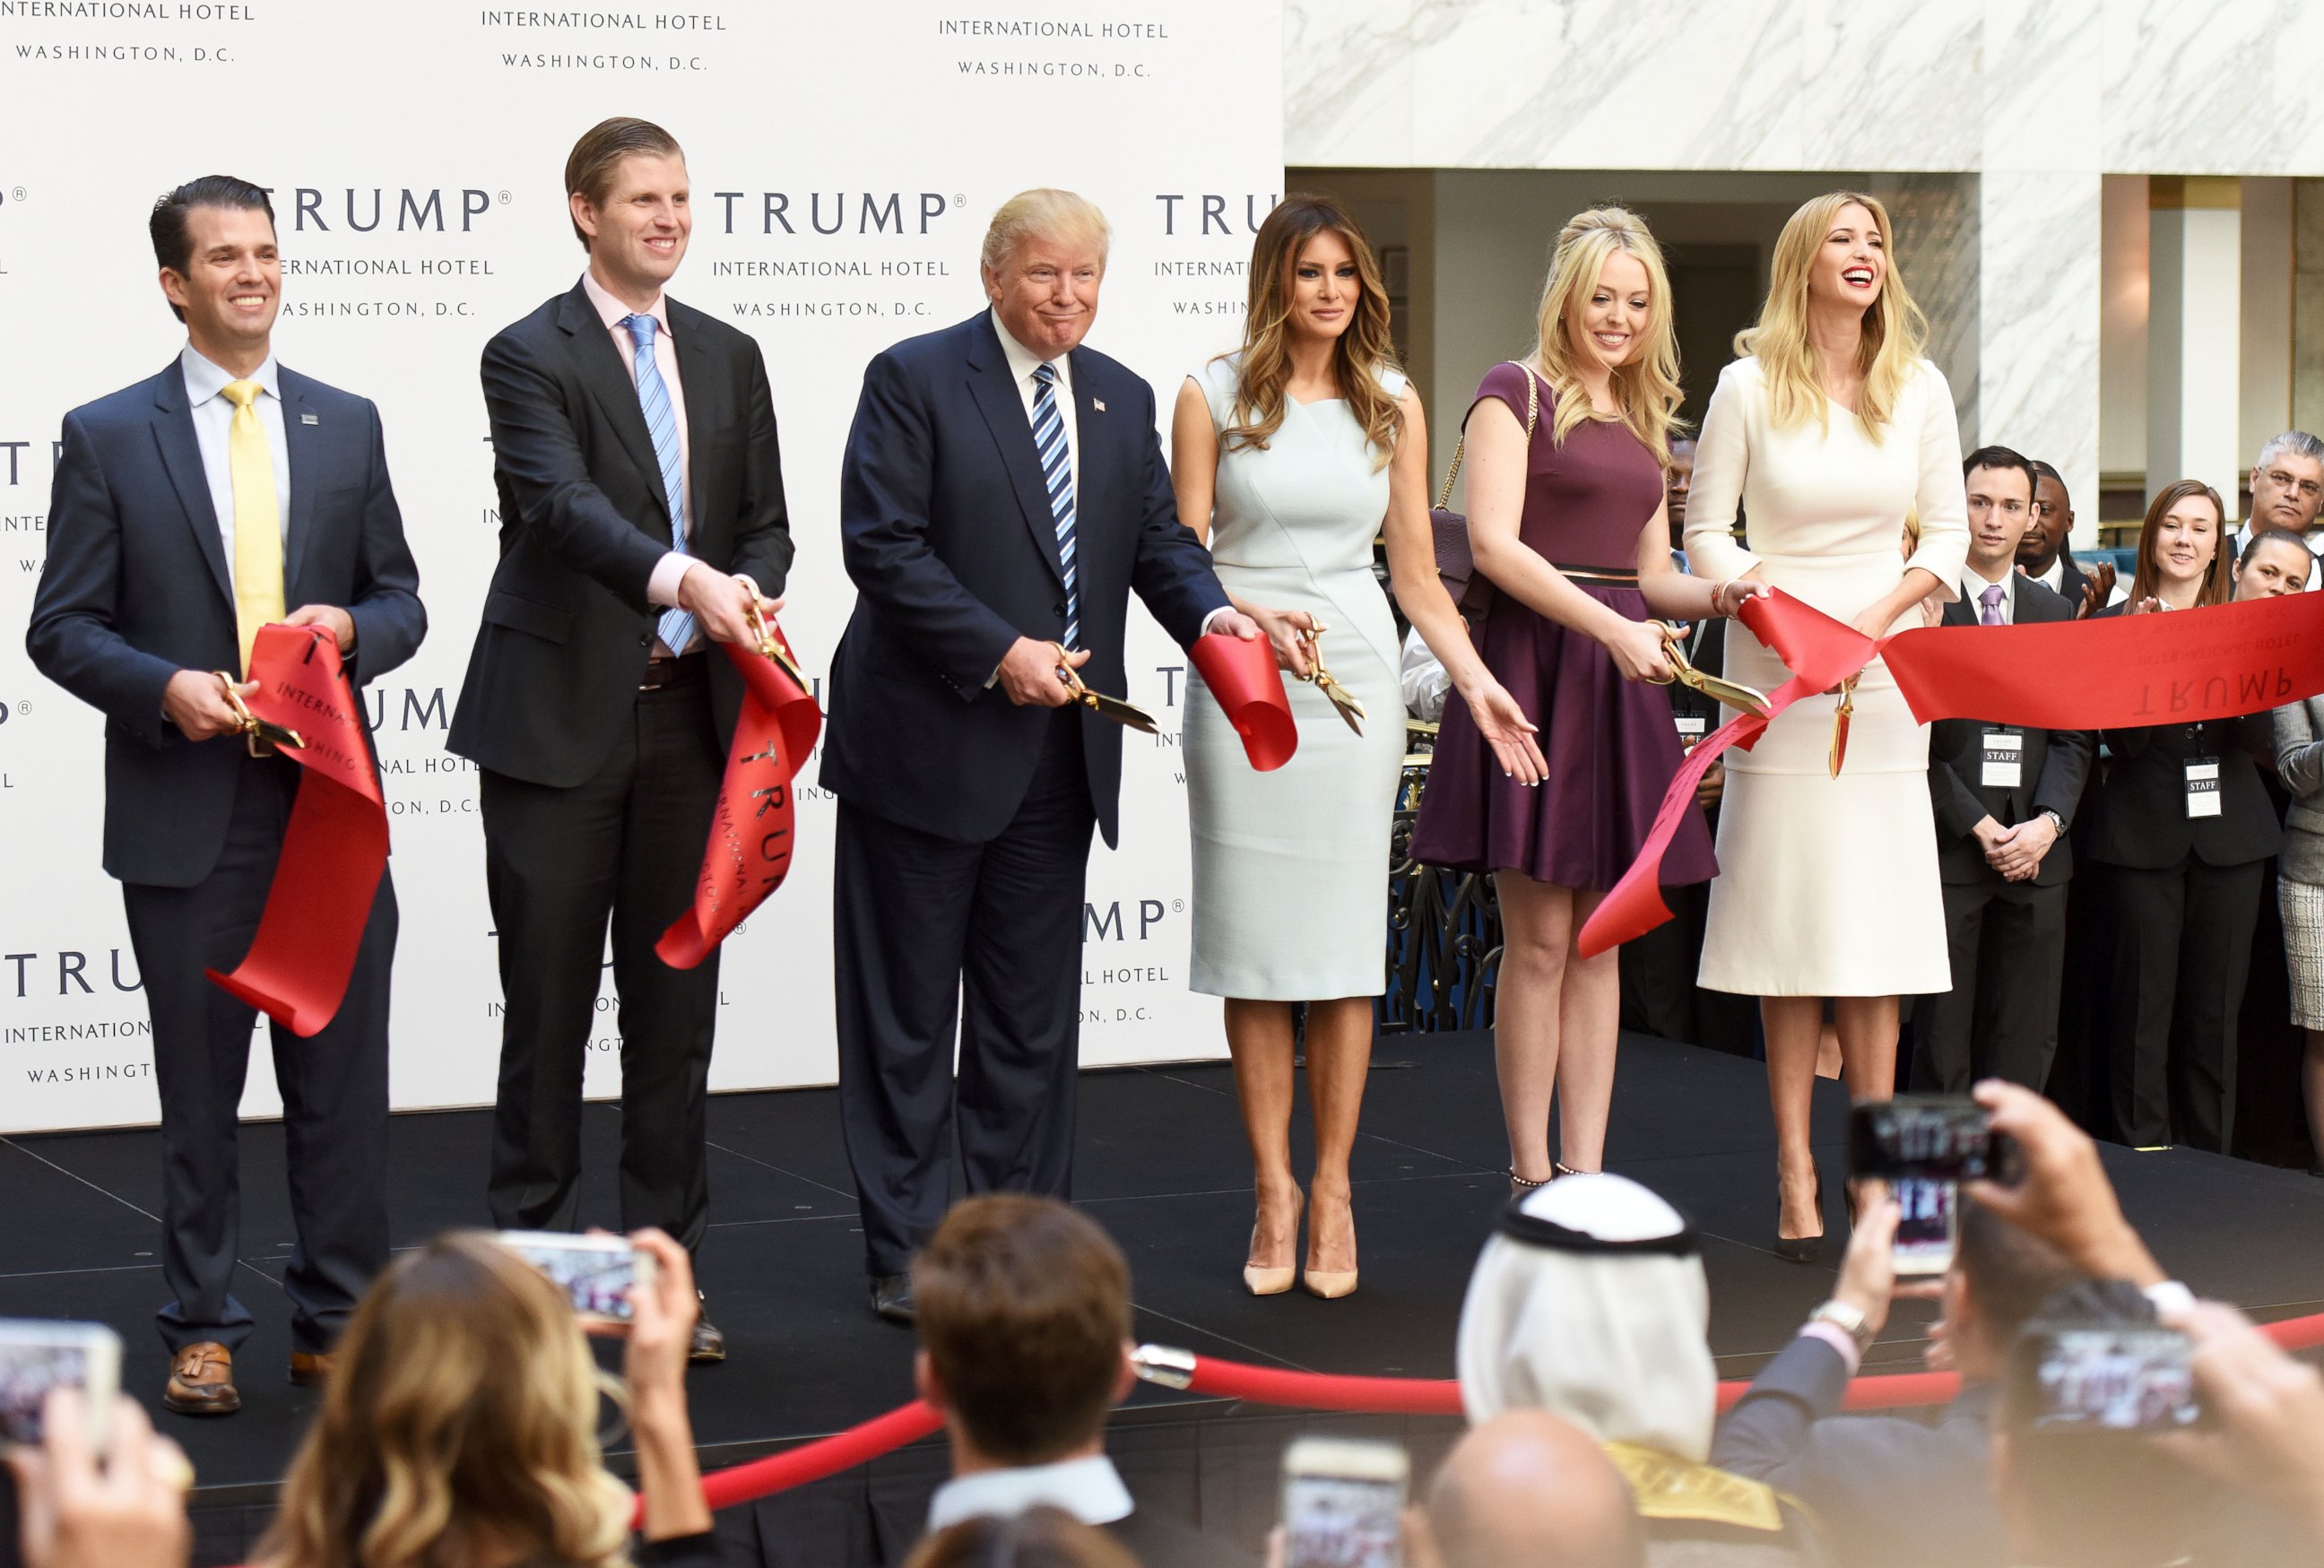 PHOTO: Republican presidential nominee Donald Trump and his family members cut the ribbon during the opening and ribbon cutting ceremony of Trump International Hotel in Washington, D.C., on Oct. 26, 2016.